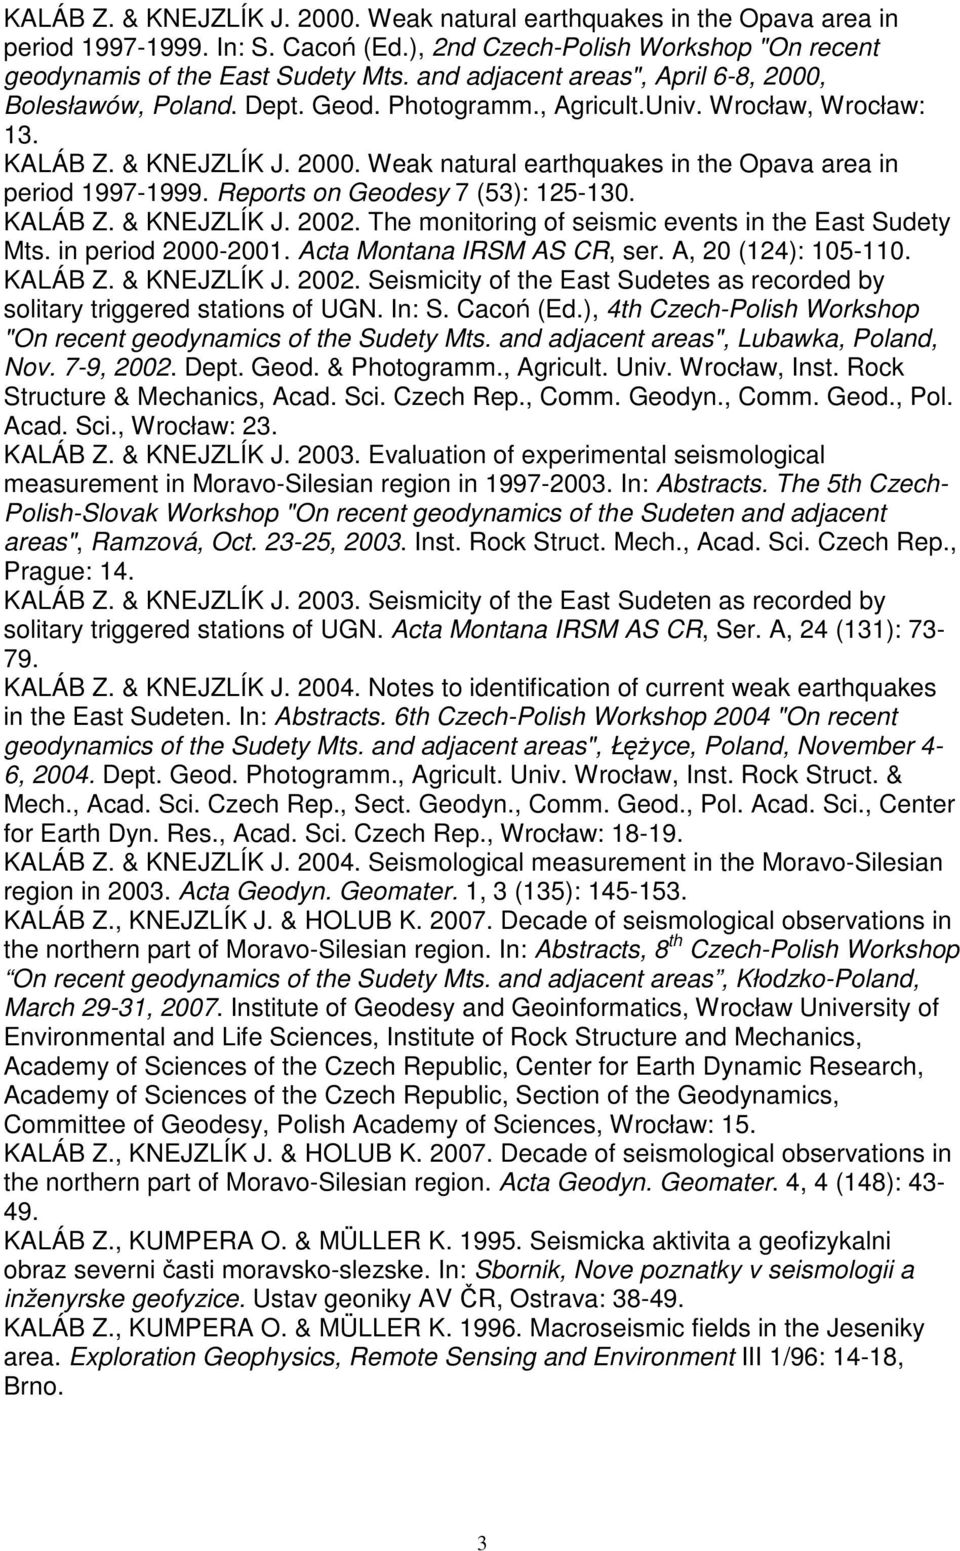 Reports on Geodesy 7 (53): 125-130. KALÁB Z. & KNEJZLÍK J. 2002. The monitoring of seismic events in the East Sudety Mts. in period 2000-2001. Acta Montana IRSM AS CR, ser. A, 20 (124): 105-110.